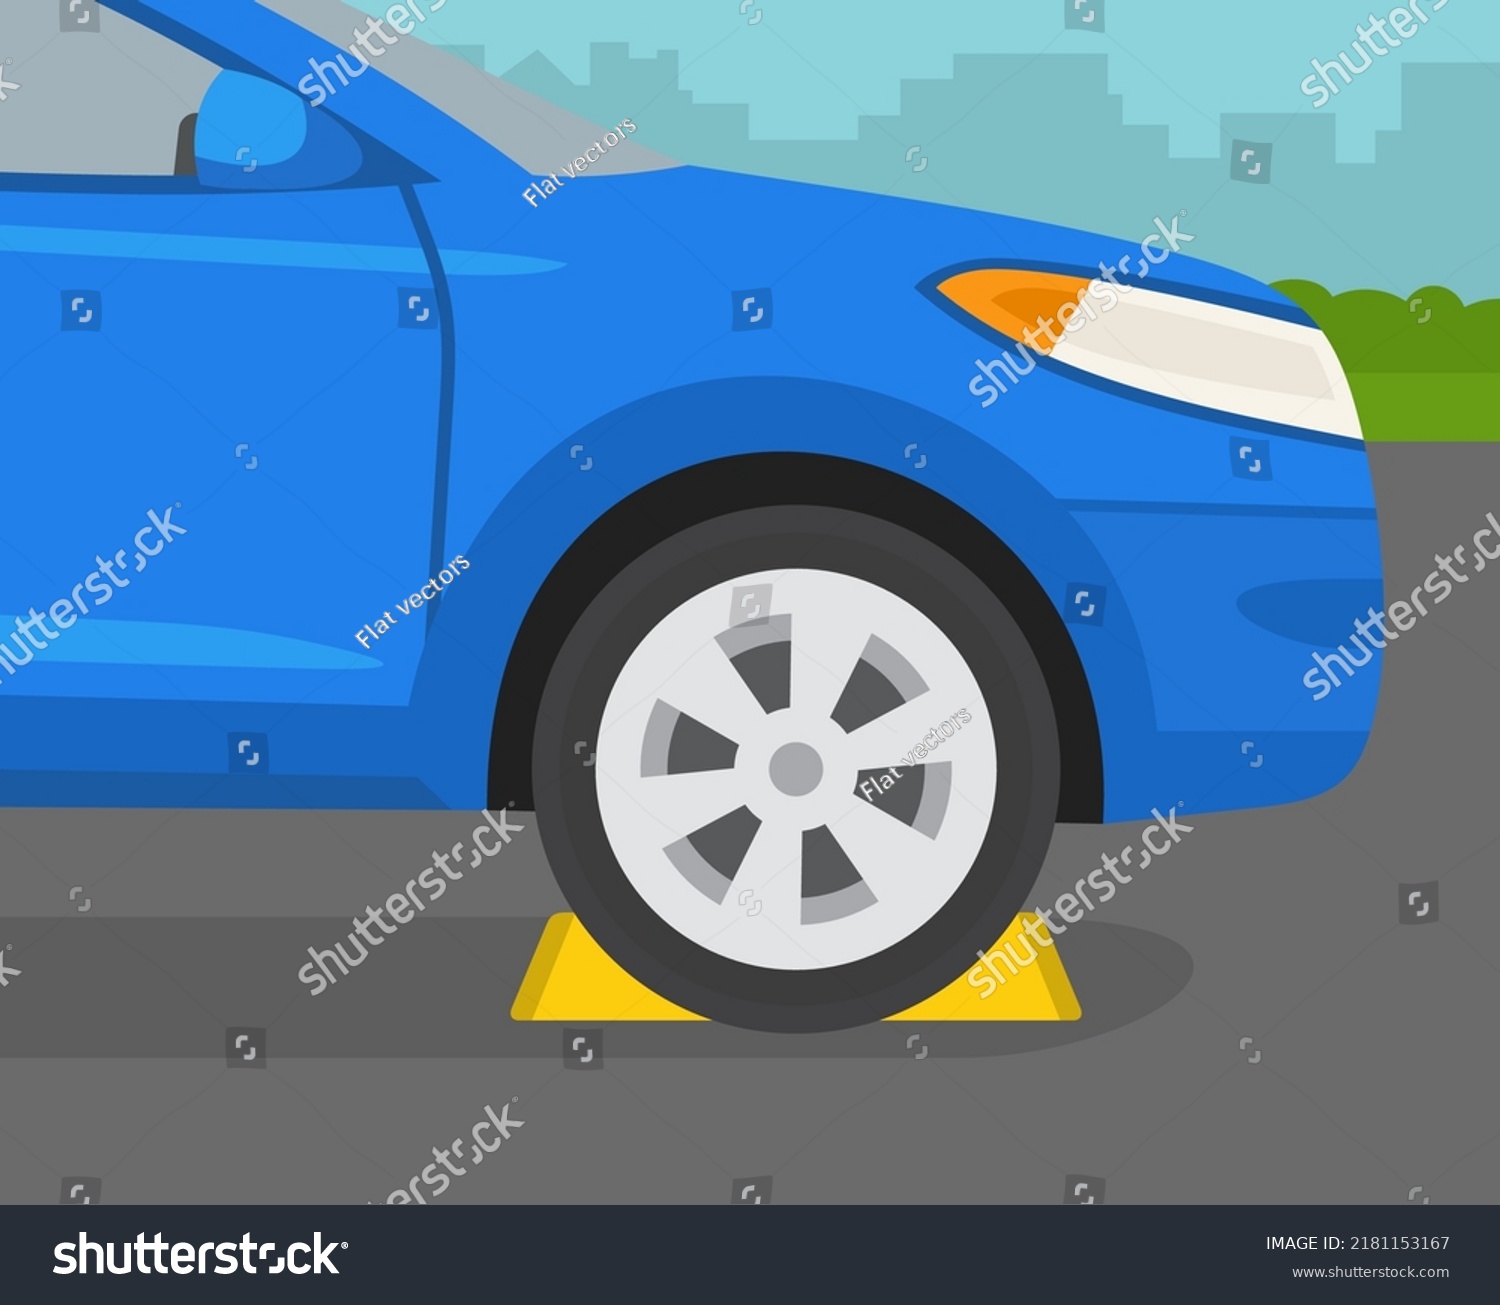 SVG of Safe driving rules and tips. Proper wheel chocking procedures. Correct wheel block placement on level grade. Close-up view of a front tire chocked from both sides. Flat vector illustration template. svg